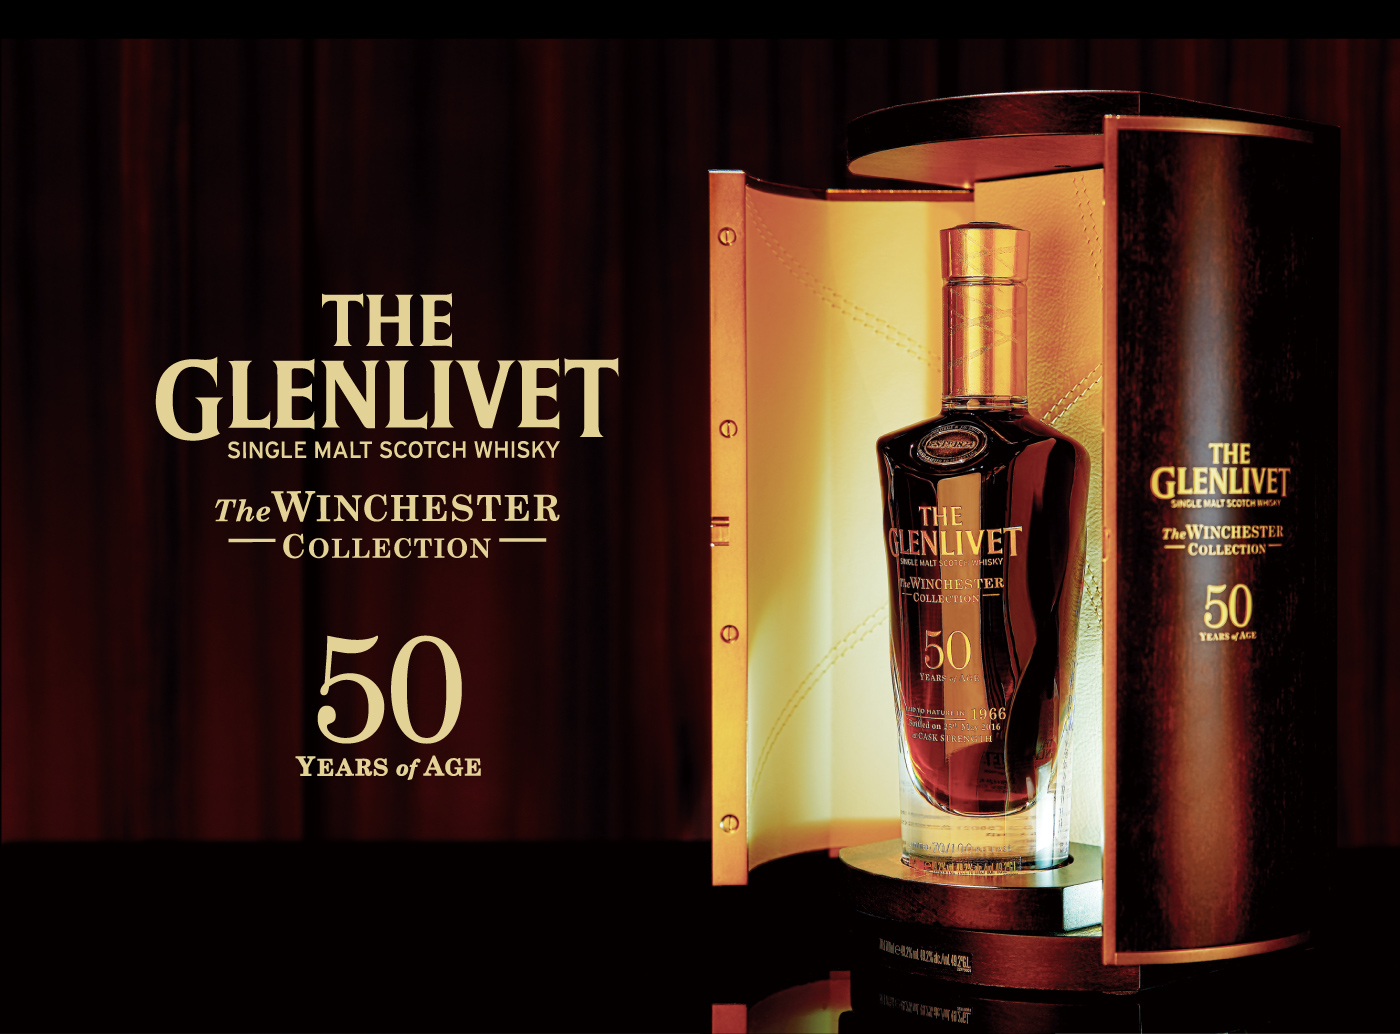 THE GLENLIVET SINGLE MALT SCOTCH WHISKY The WINCHESTER - COLLECTION - 50 YEARS of AGE